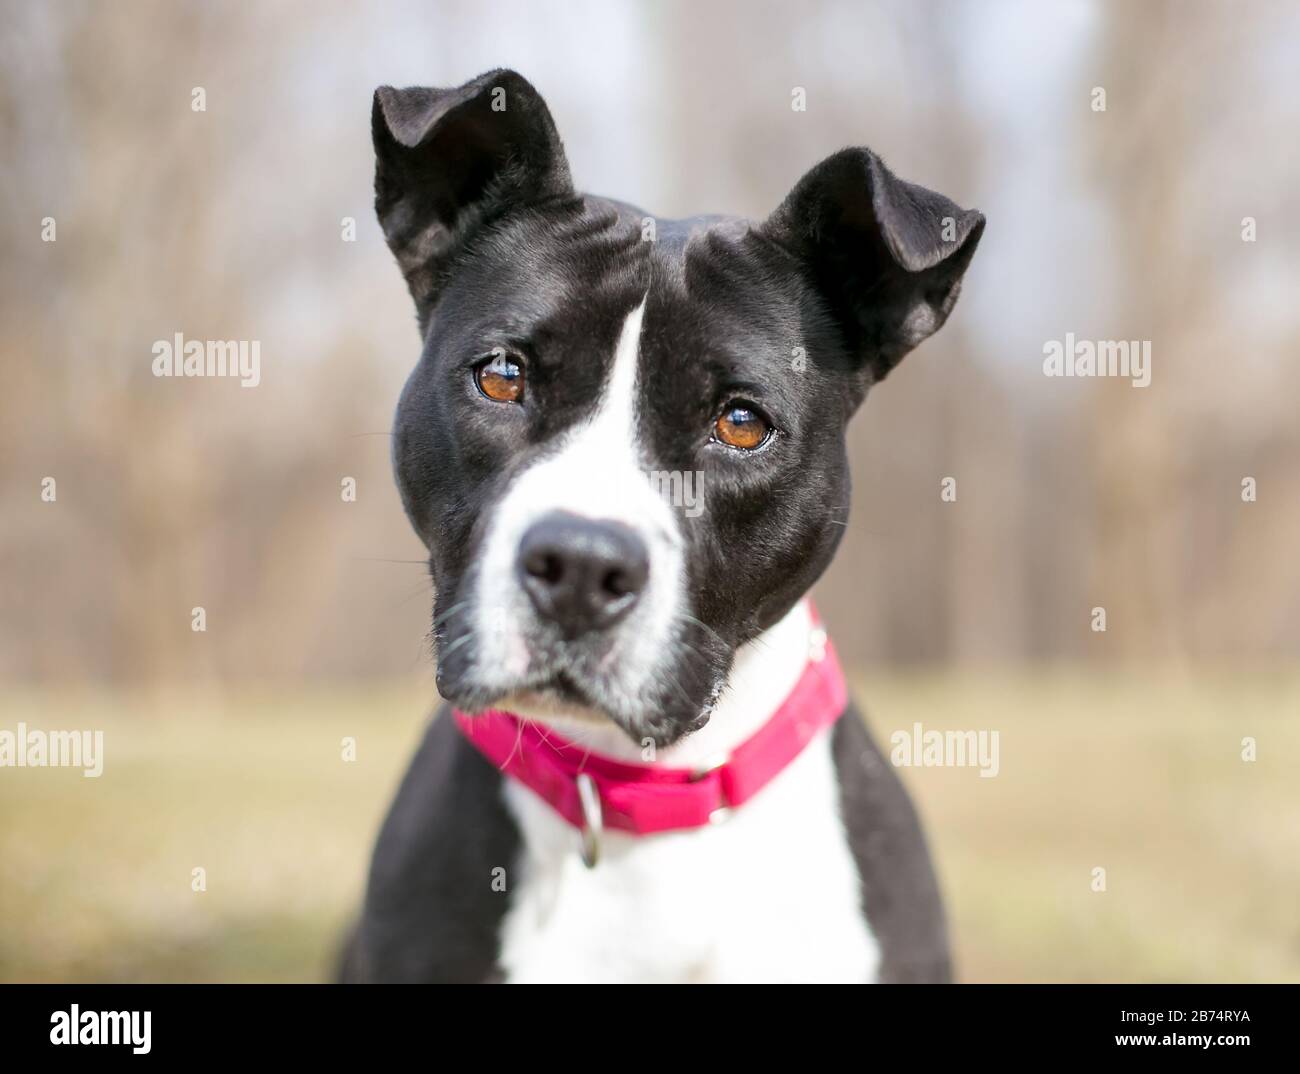 A black and white Pit Bull Terrier mixed breed dog wearing a red collar and listening with a head tilt Stock Photo